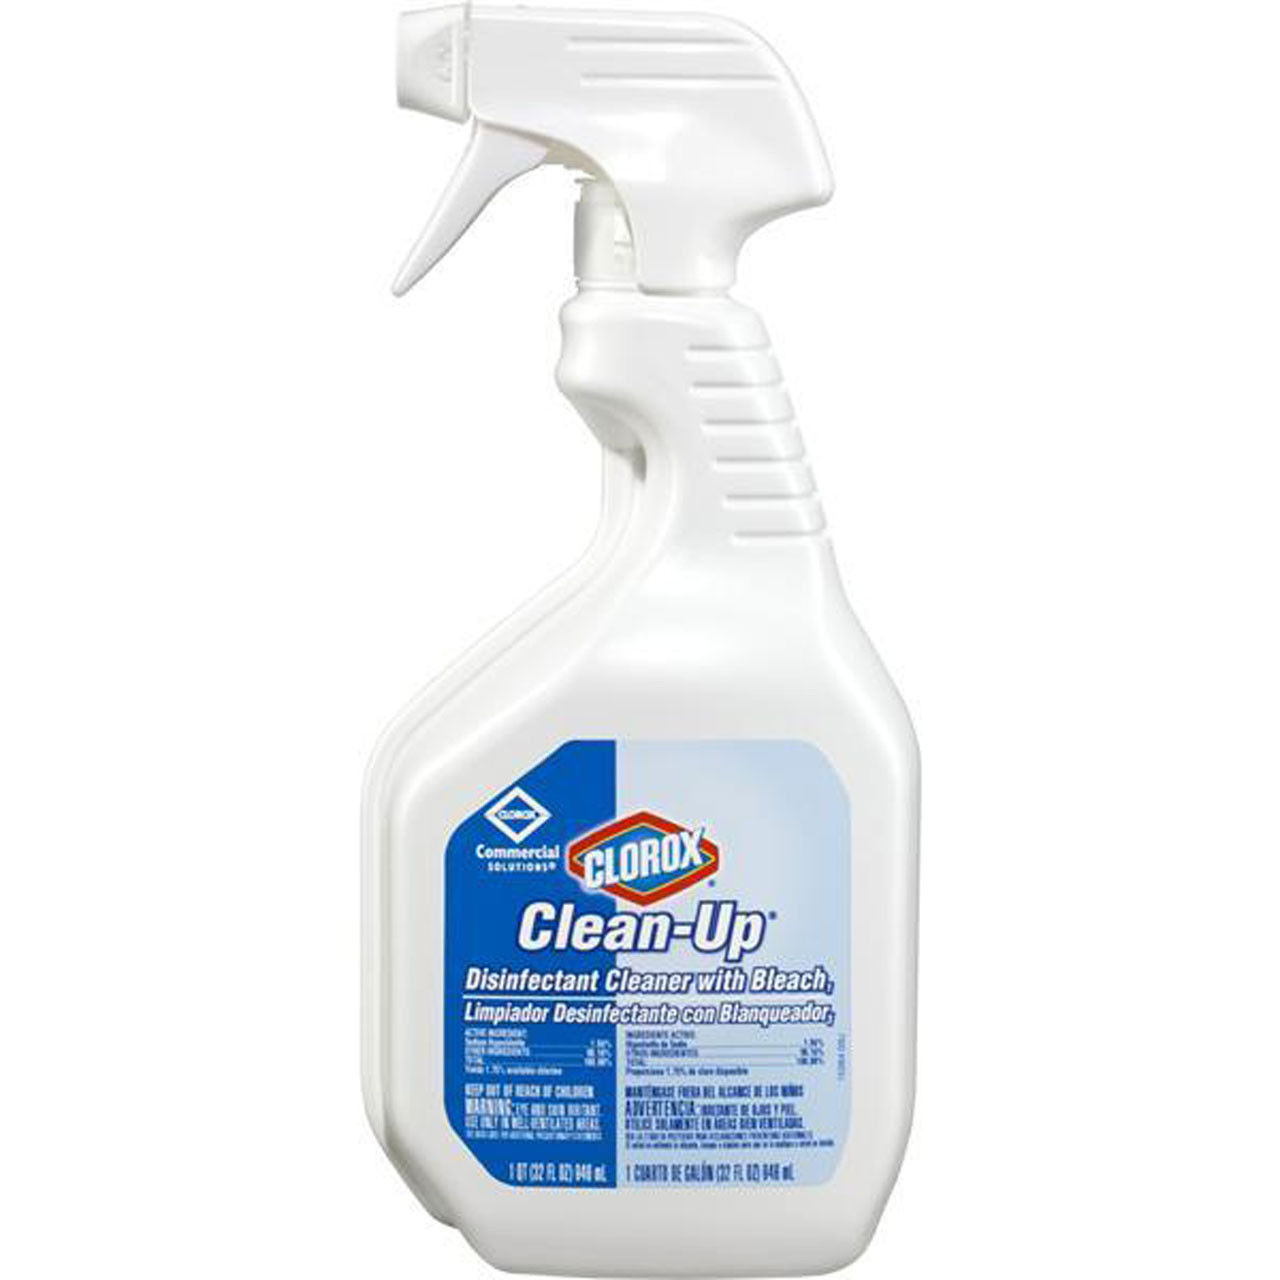 What does Clorox Clean-Up eliminate in your space?